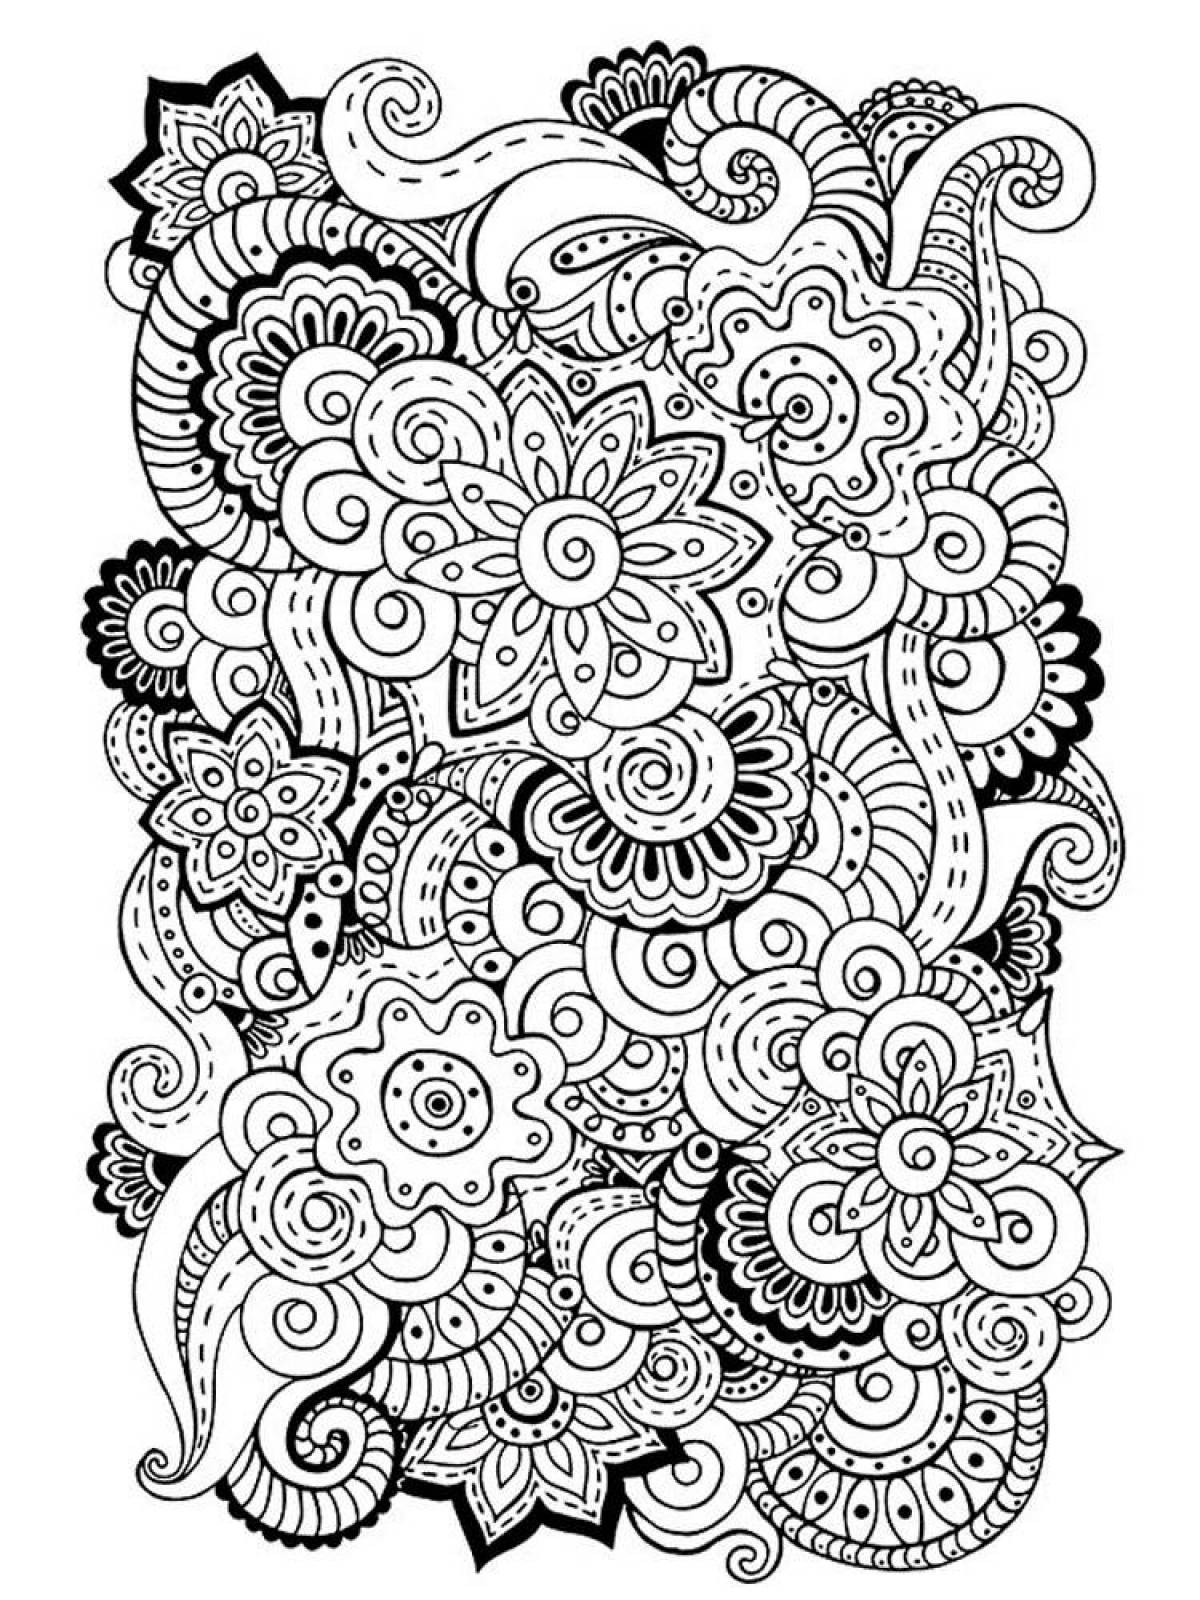 Unique coloring page with small details